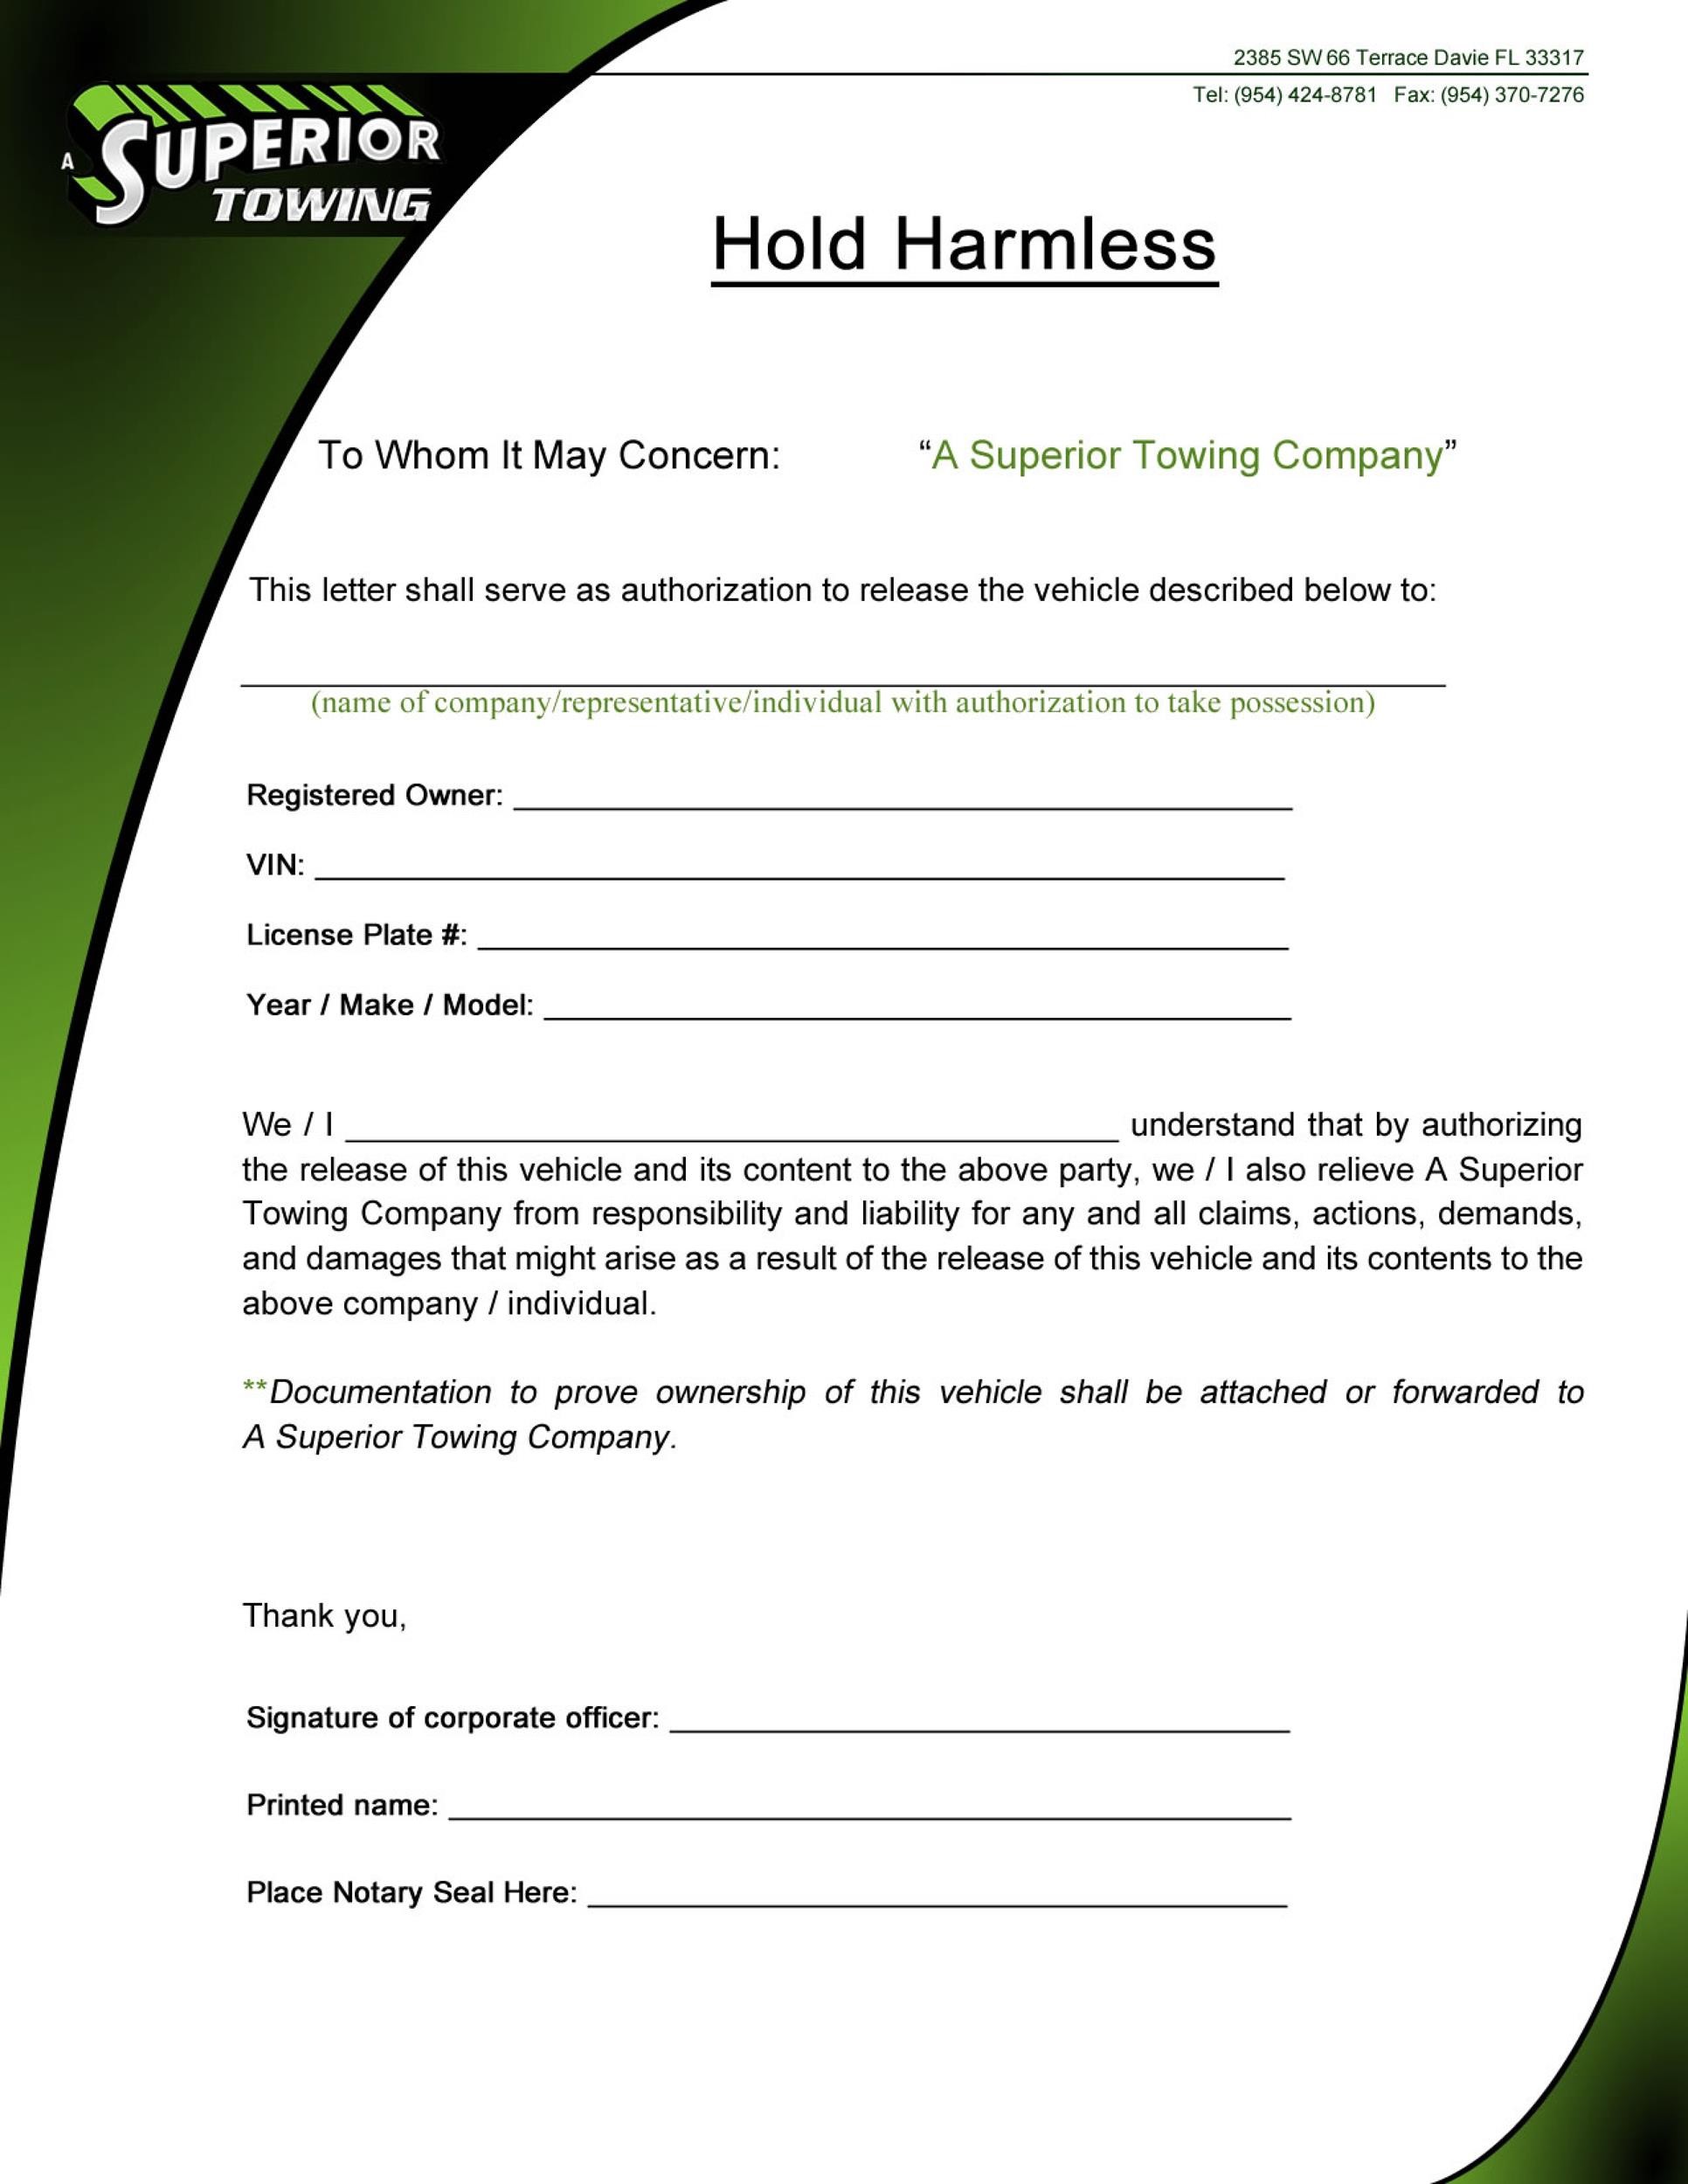 Hold Harmless Agreement Template Free Download